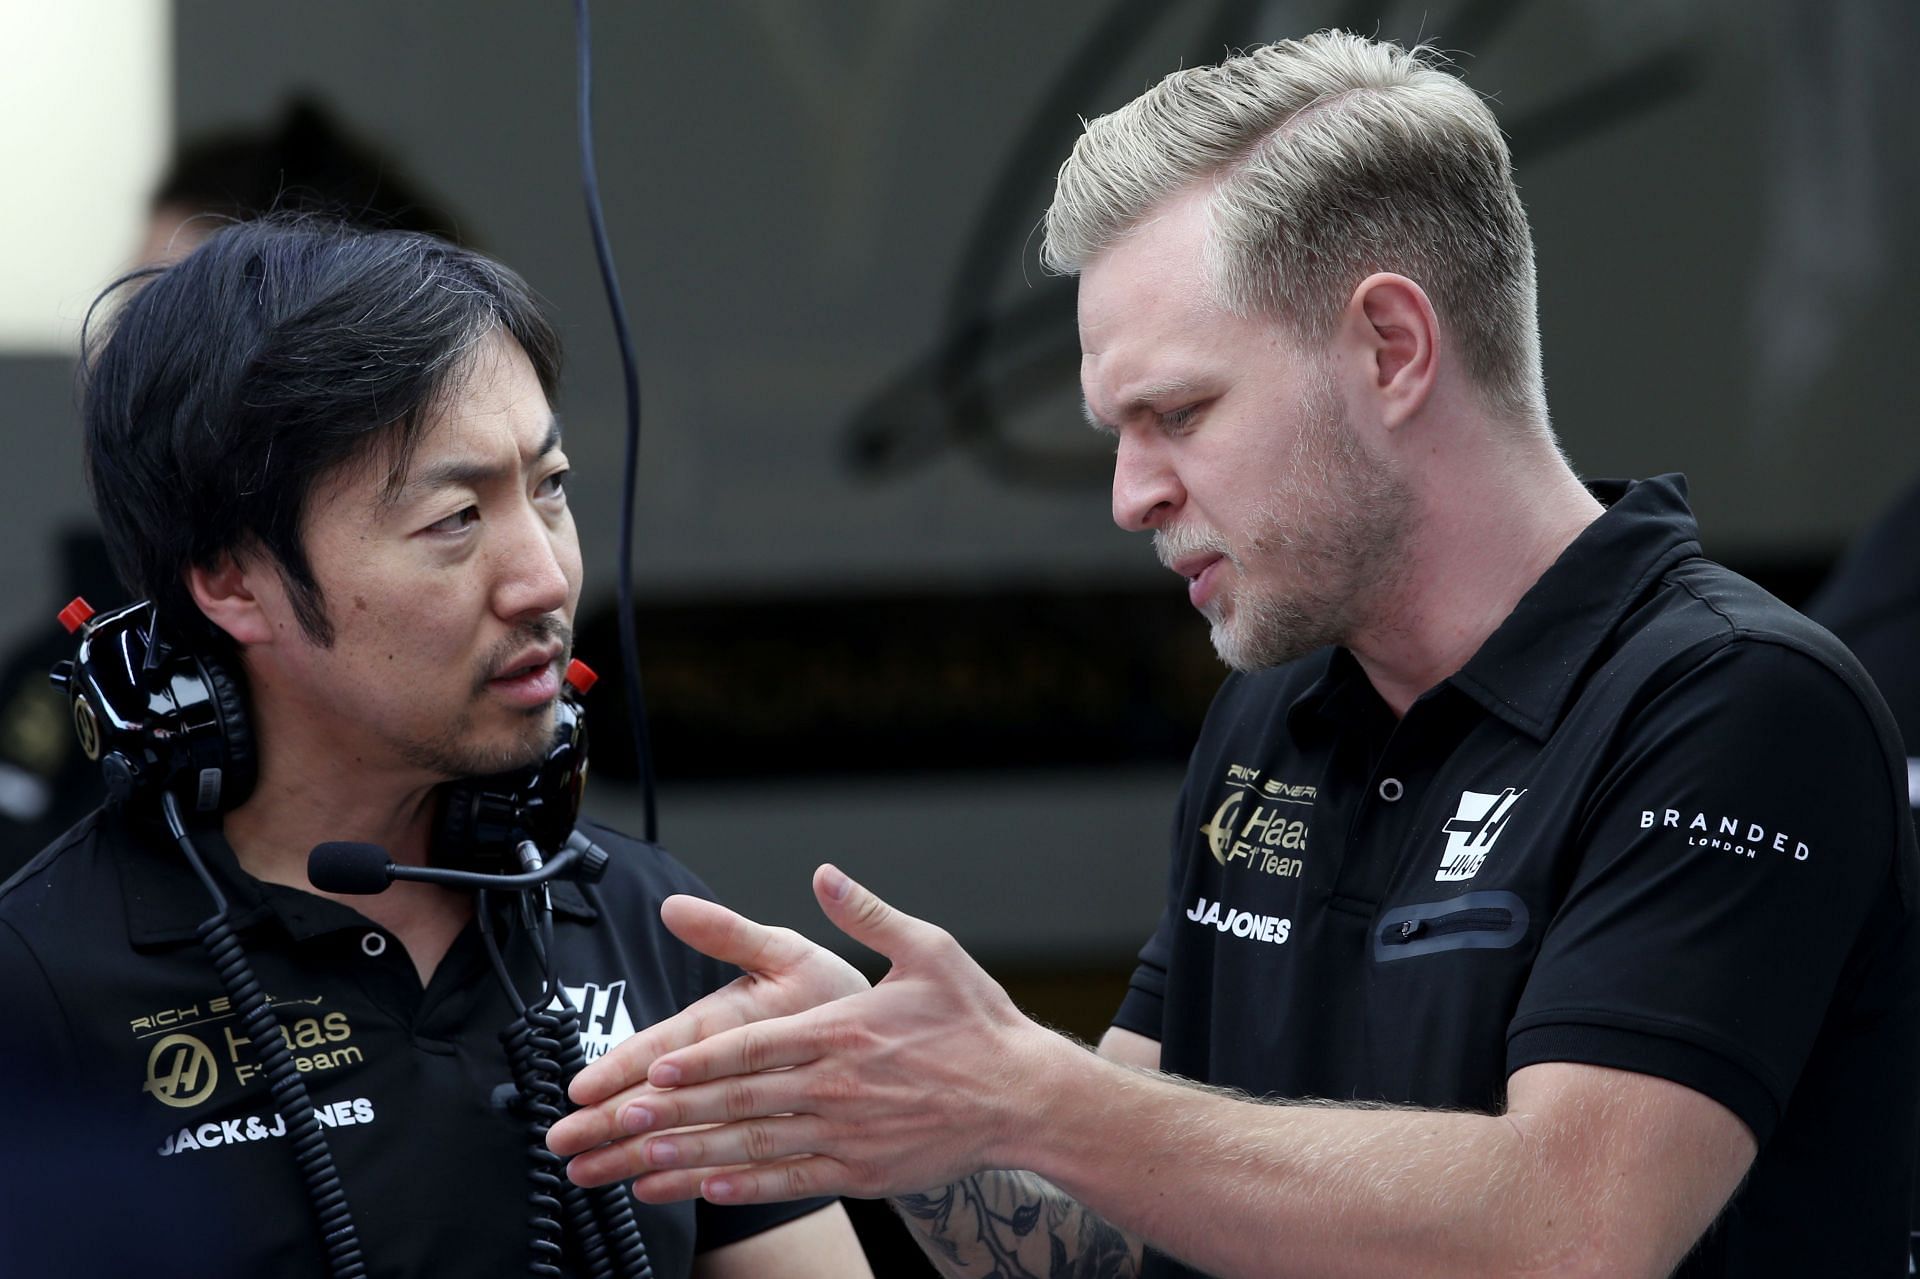 Ayao Komatsu in conversation with Haas&#039; Kevin Magnussen during the 2019 F1 season&#039;s winter testing in Barcelona (Photo by Charles Coates/Getty Images)